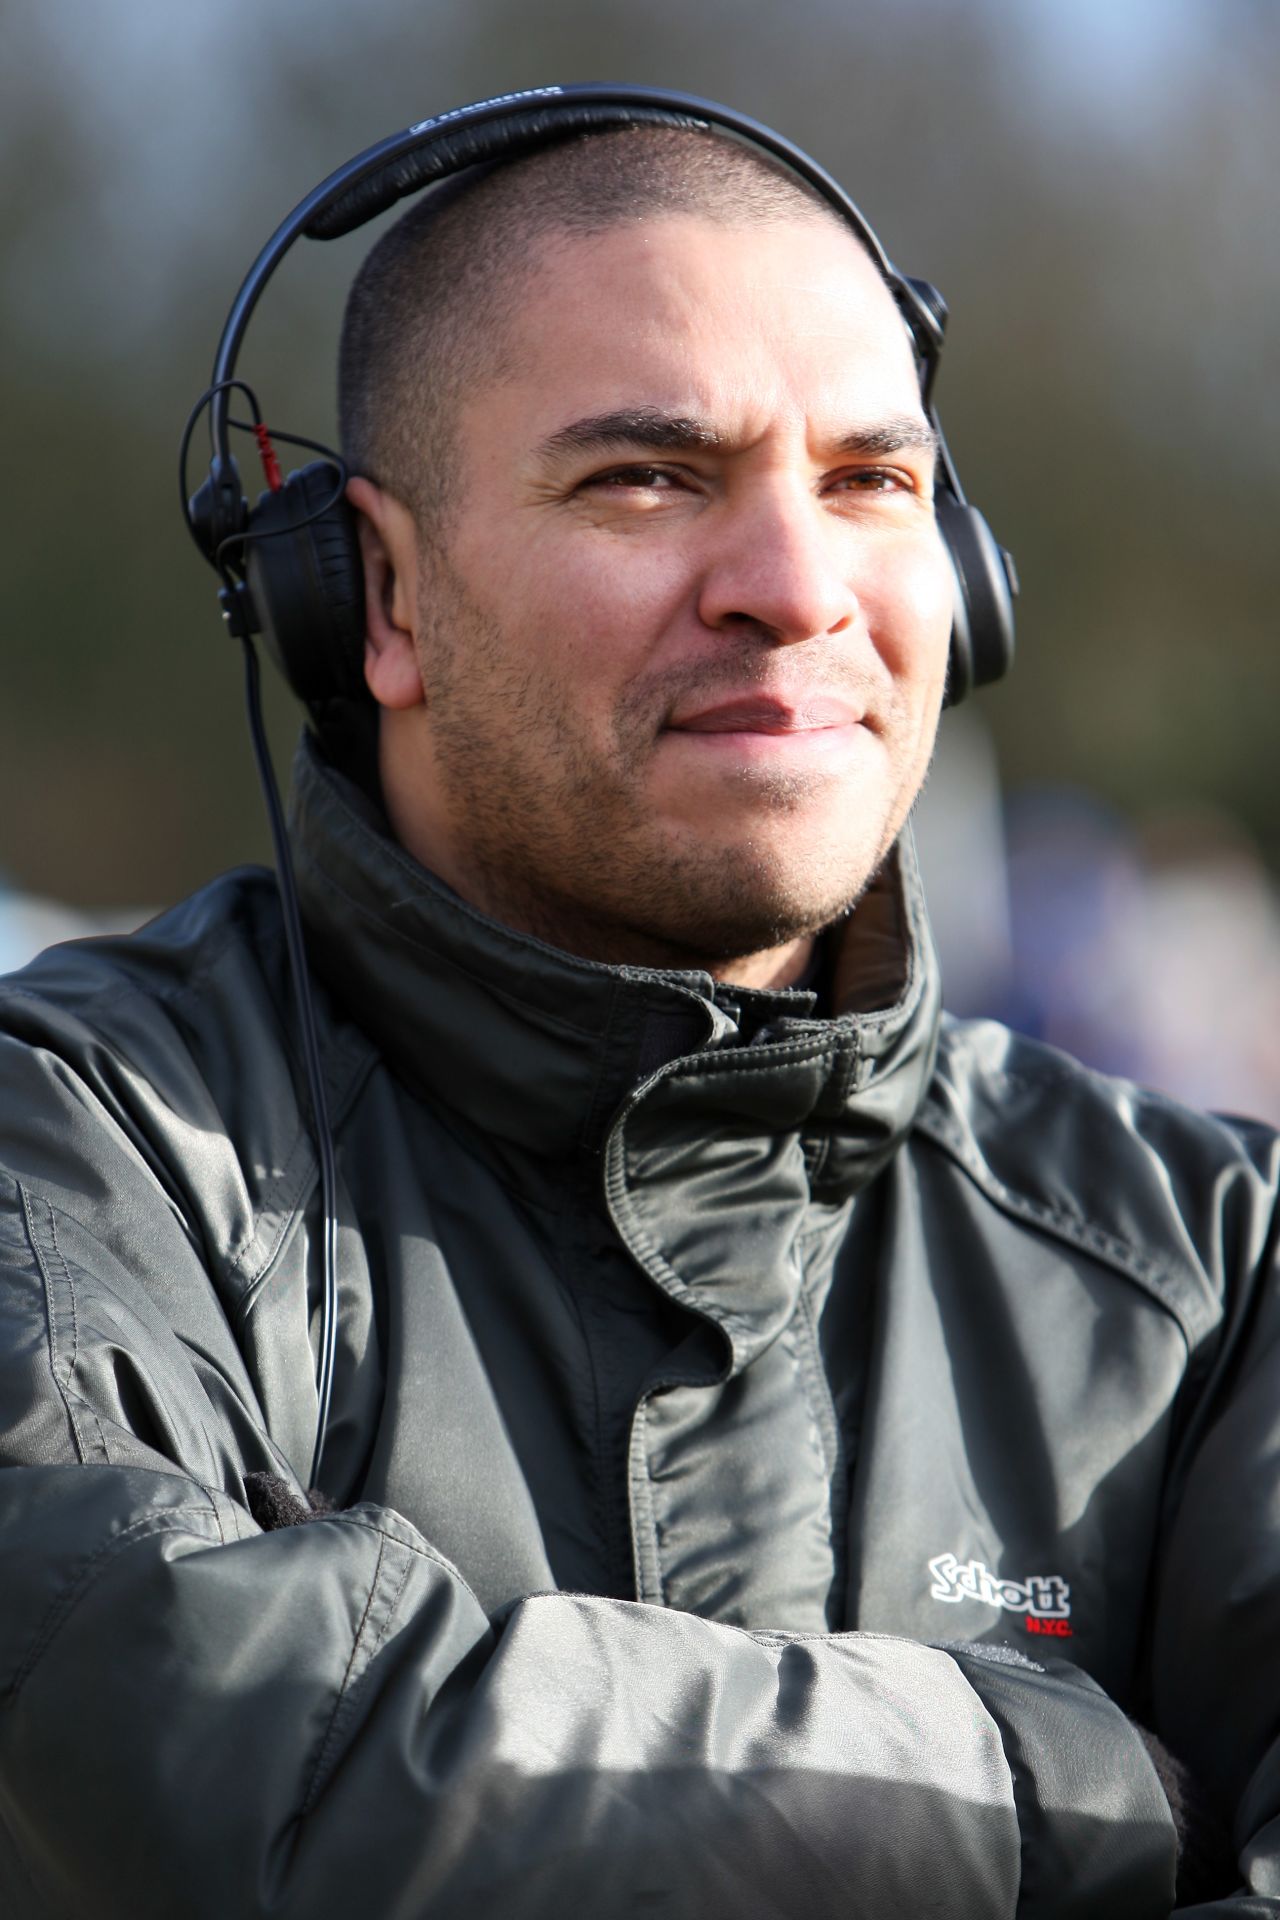 In January, a university law student was reported to police after former Liverpool player Stan Collymore, now a pundit, complained of being racially abused on the micro-blogging site Twitter.